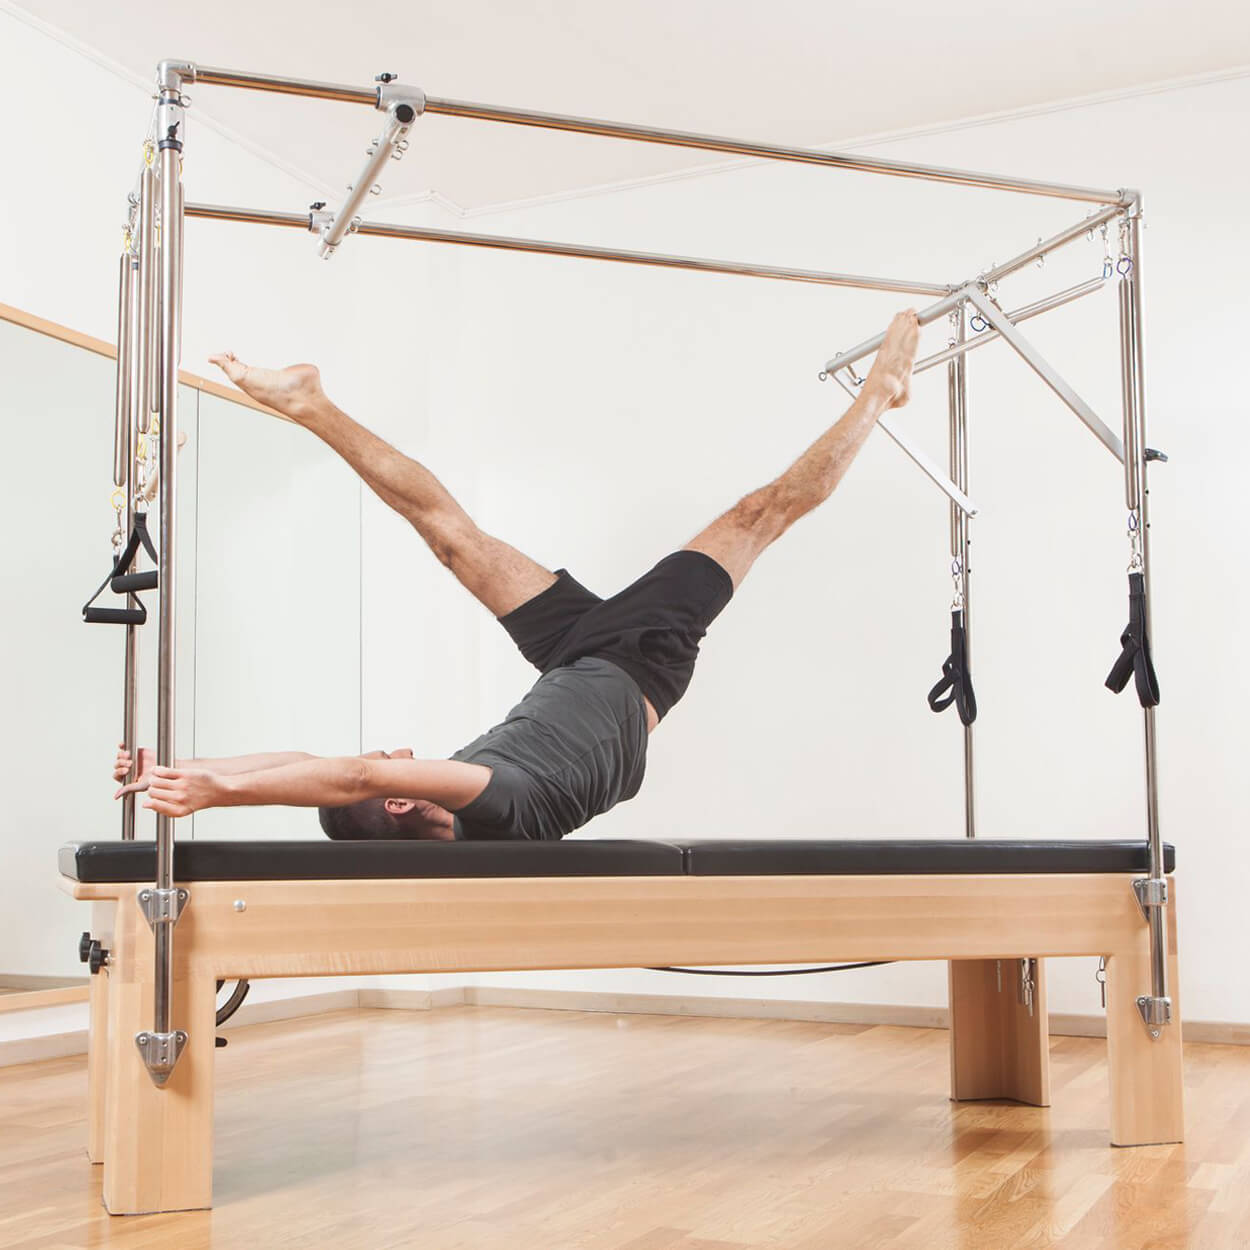 McLean Pilates: What is the Cadillac? - McLean Pilates Studio